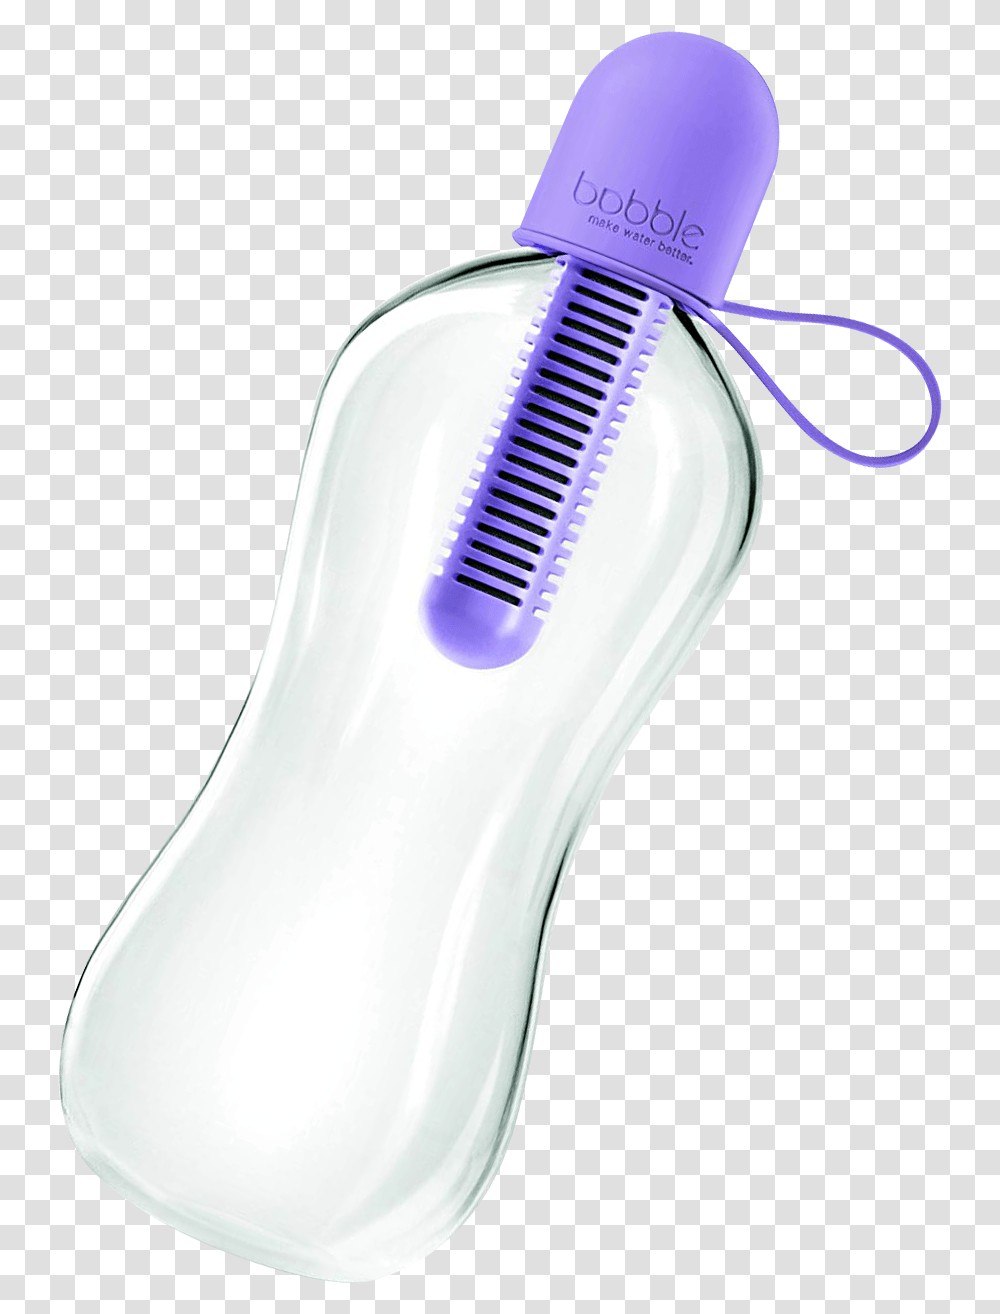 Homepage Bobble Bobble Water Bottle With Filter, Brush, Tool, Comb, Toothbrush Transparent Png